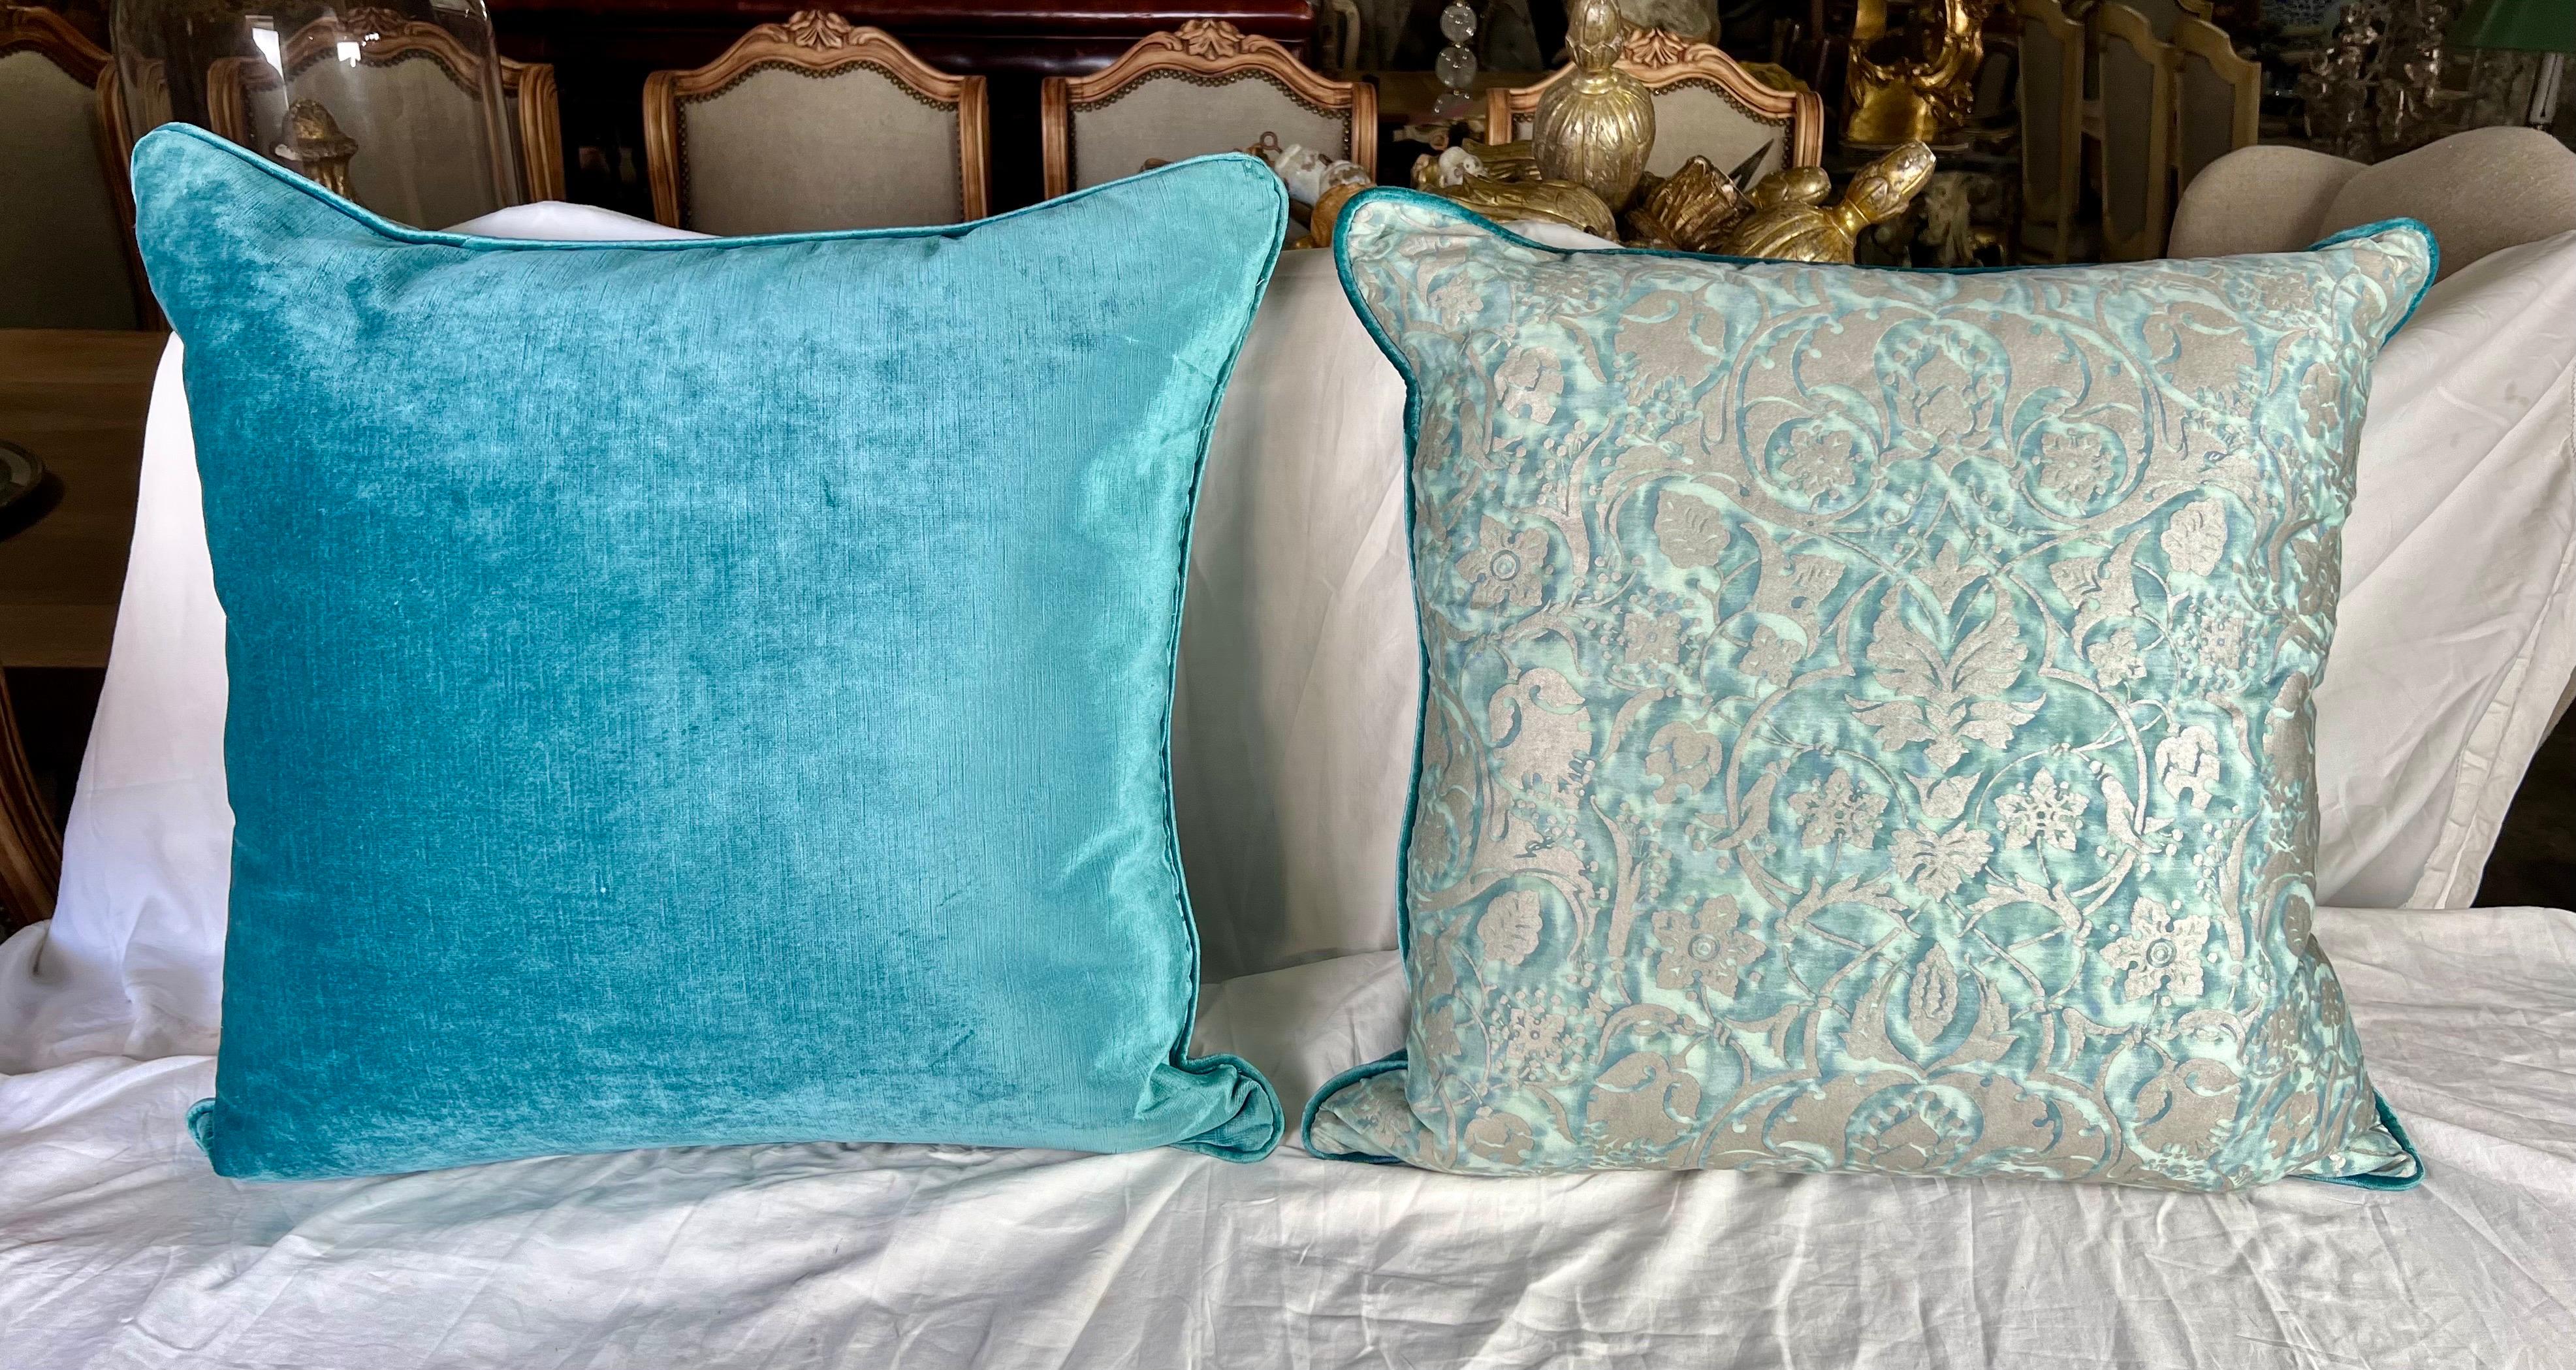 Pair of Custom Aqua & Gold Mariano Fortuny Pillows In New Condition For Sale In Los Angeles, CA